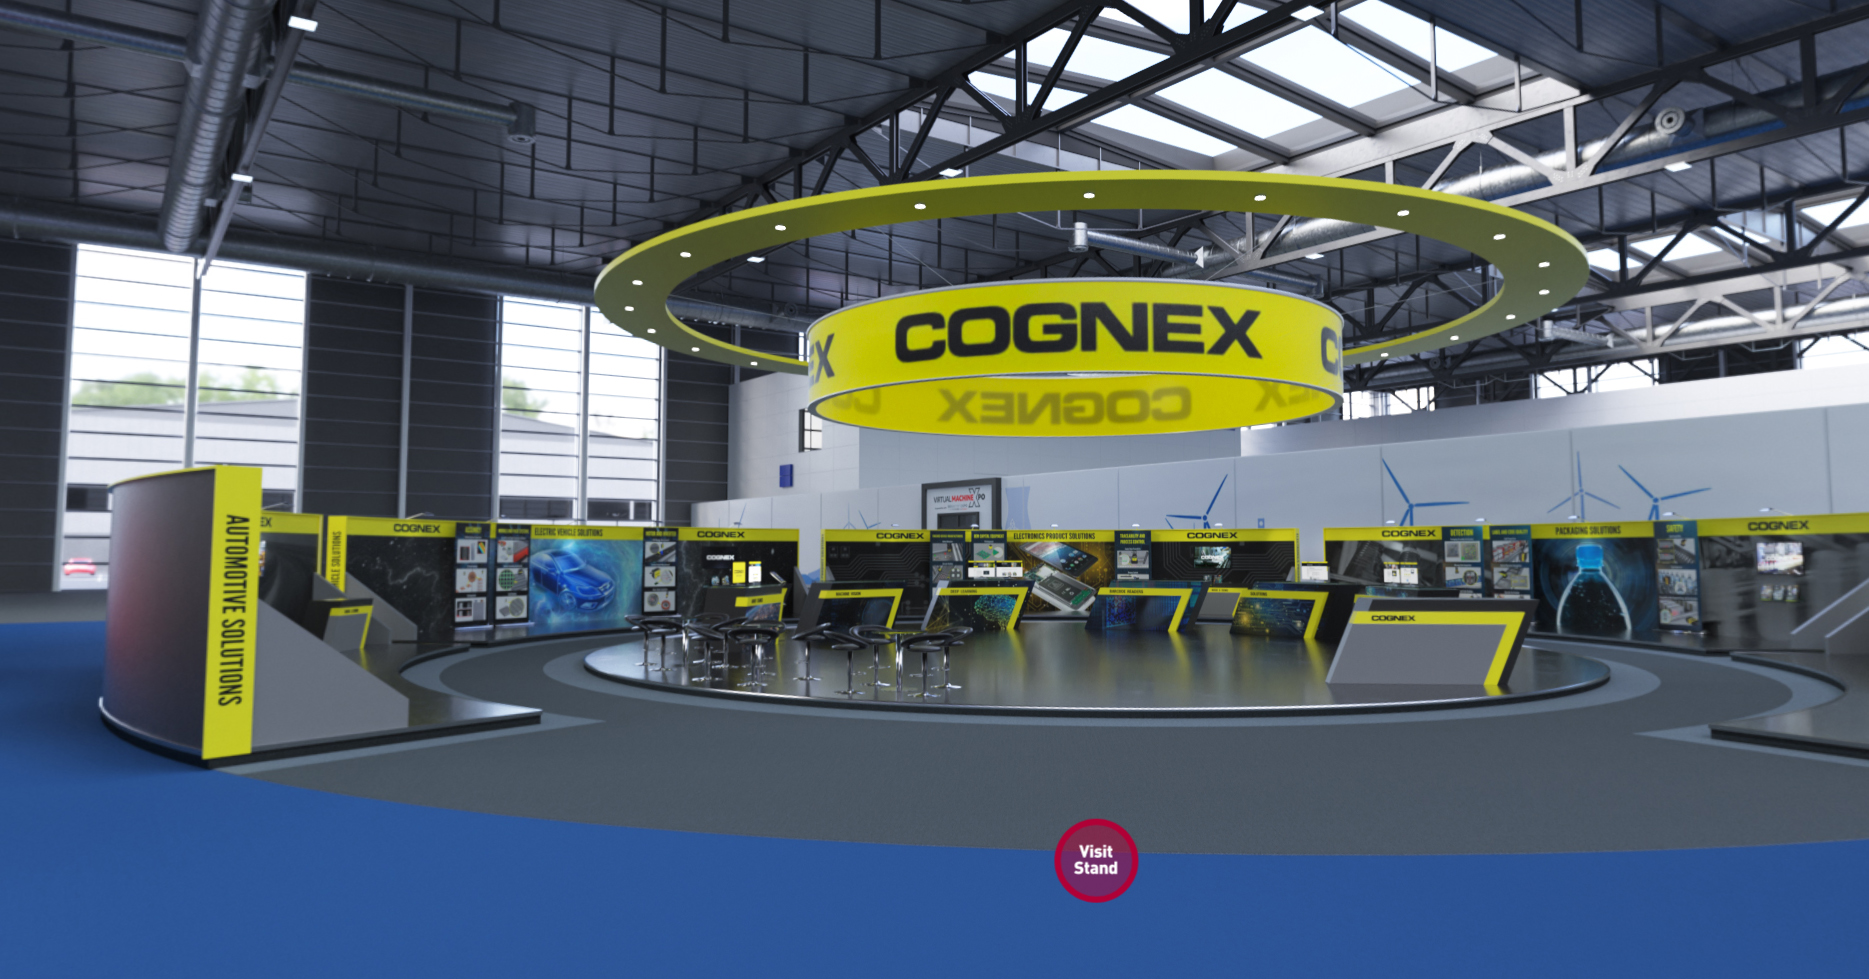 Launching a striking yellow and black stand is machine vision specialist Cognex.